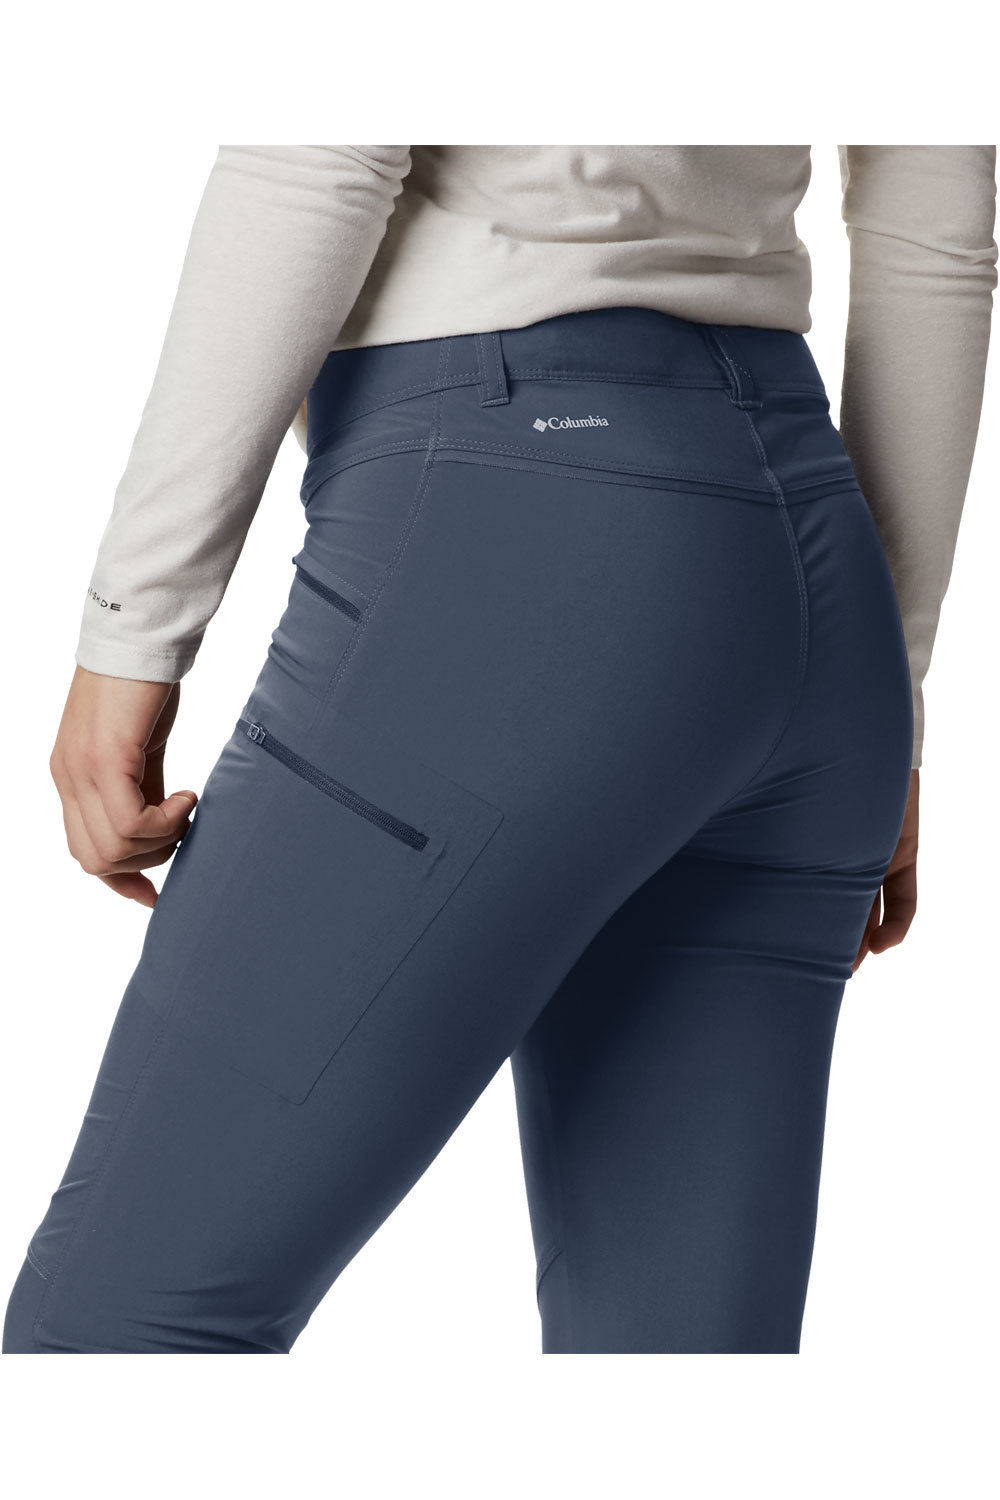 Columbia Peak to Point Pants Women (1727601) nocturnal